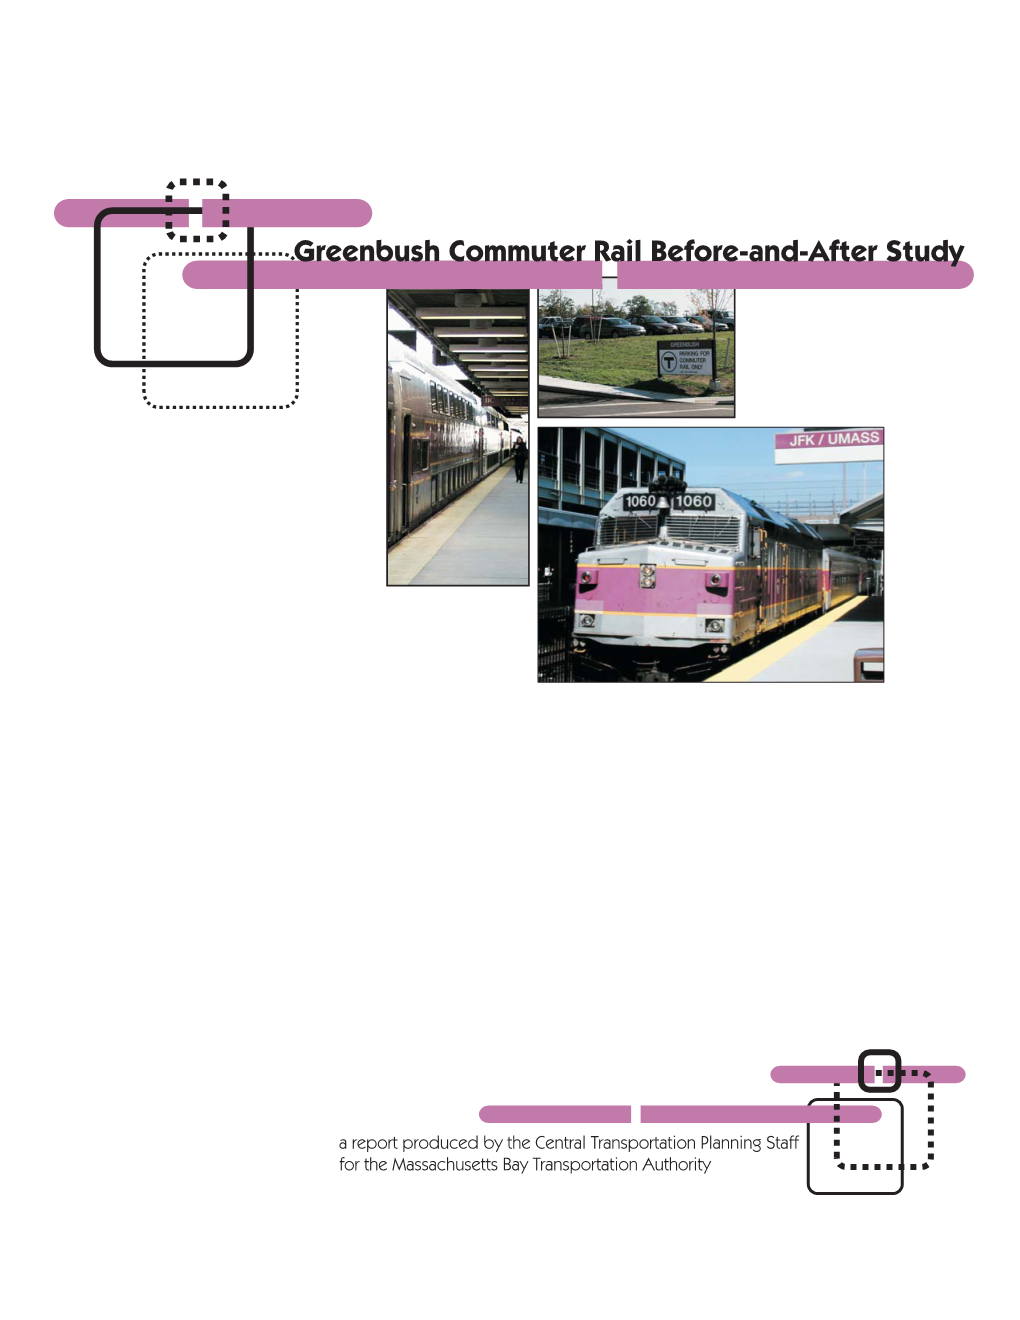 Greenbush Commuter Rail Before-And-After Study